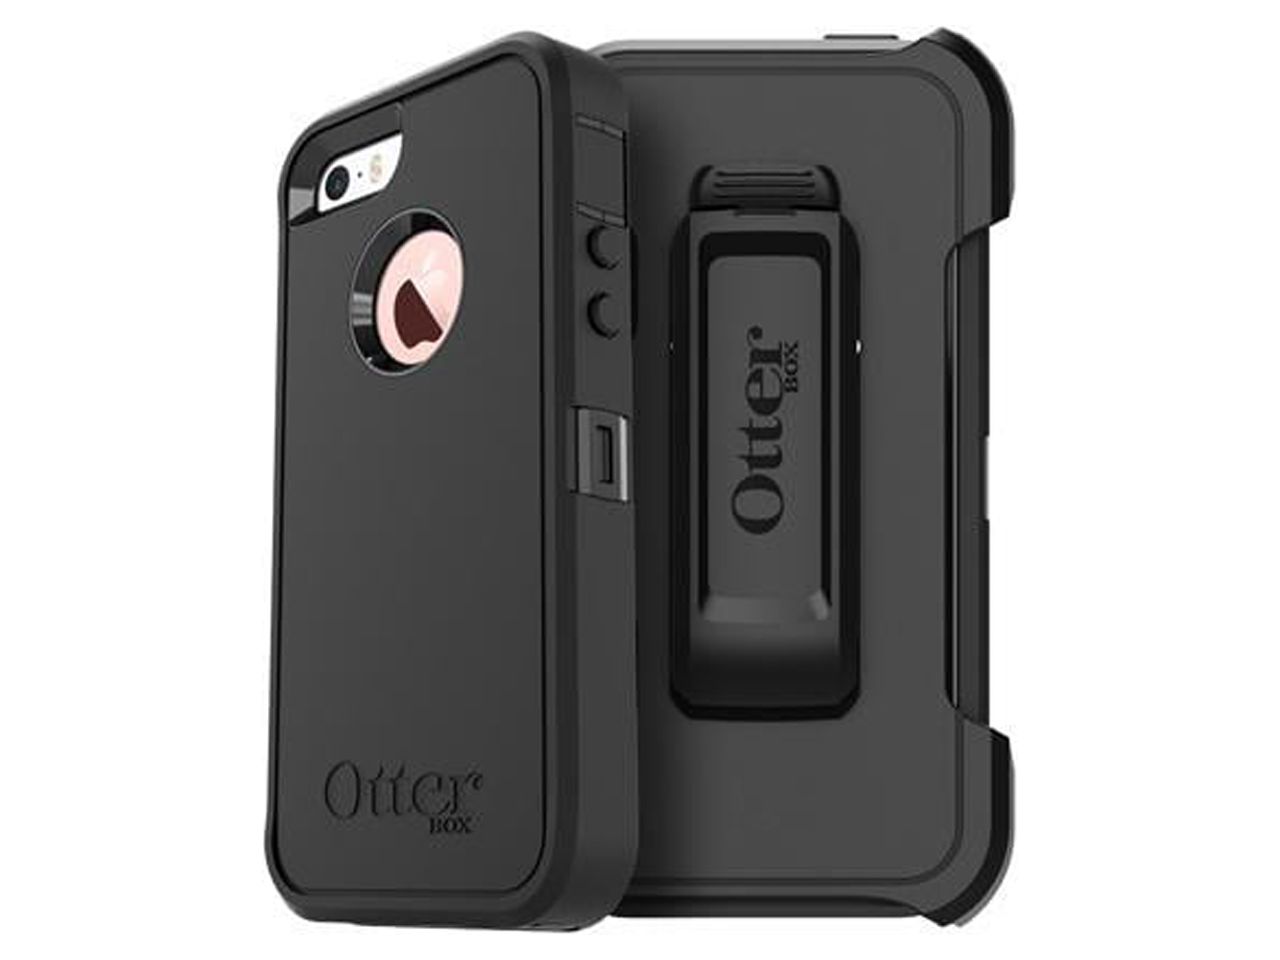 OtterBox Defender Carrying Case (Holster) iPhone 5, iPhone 5S, iPhone SE - Black - image 1 of 7